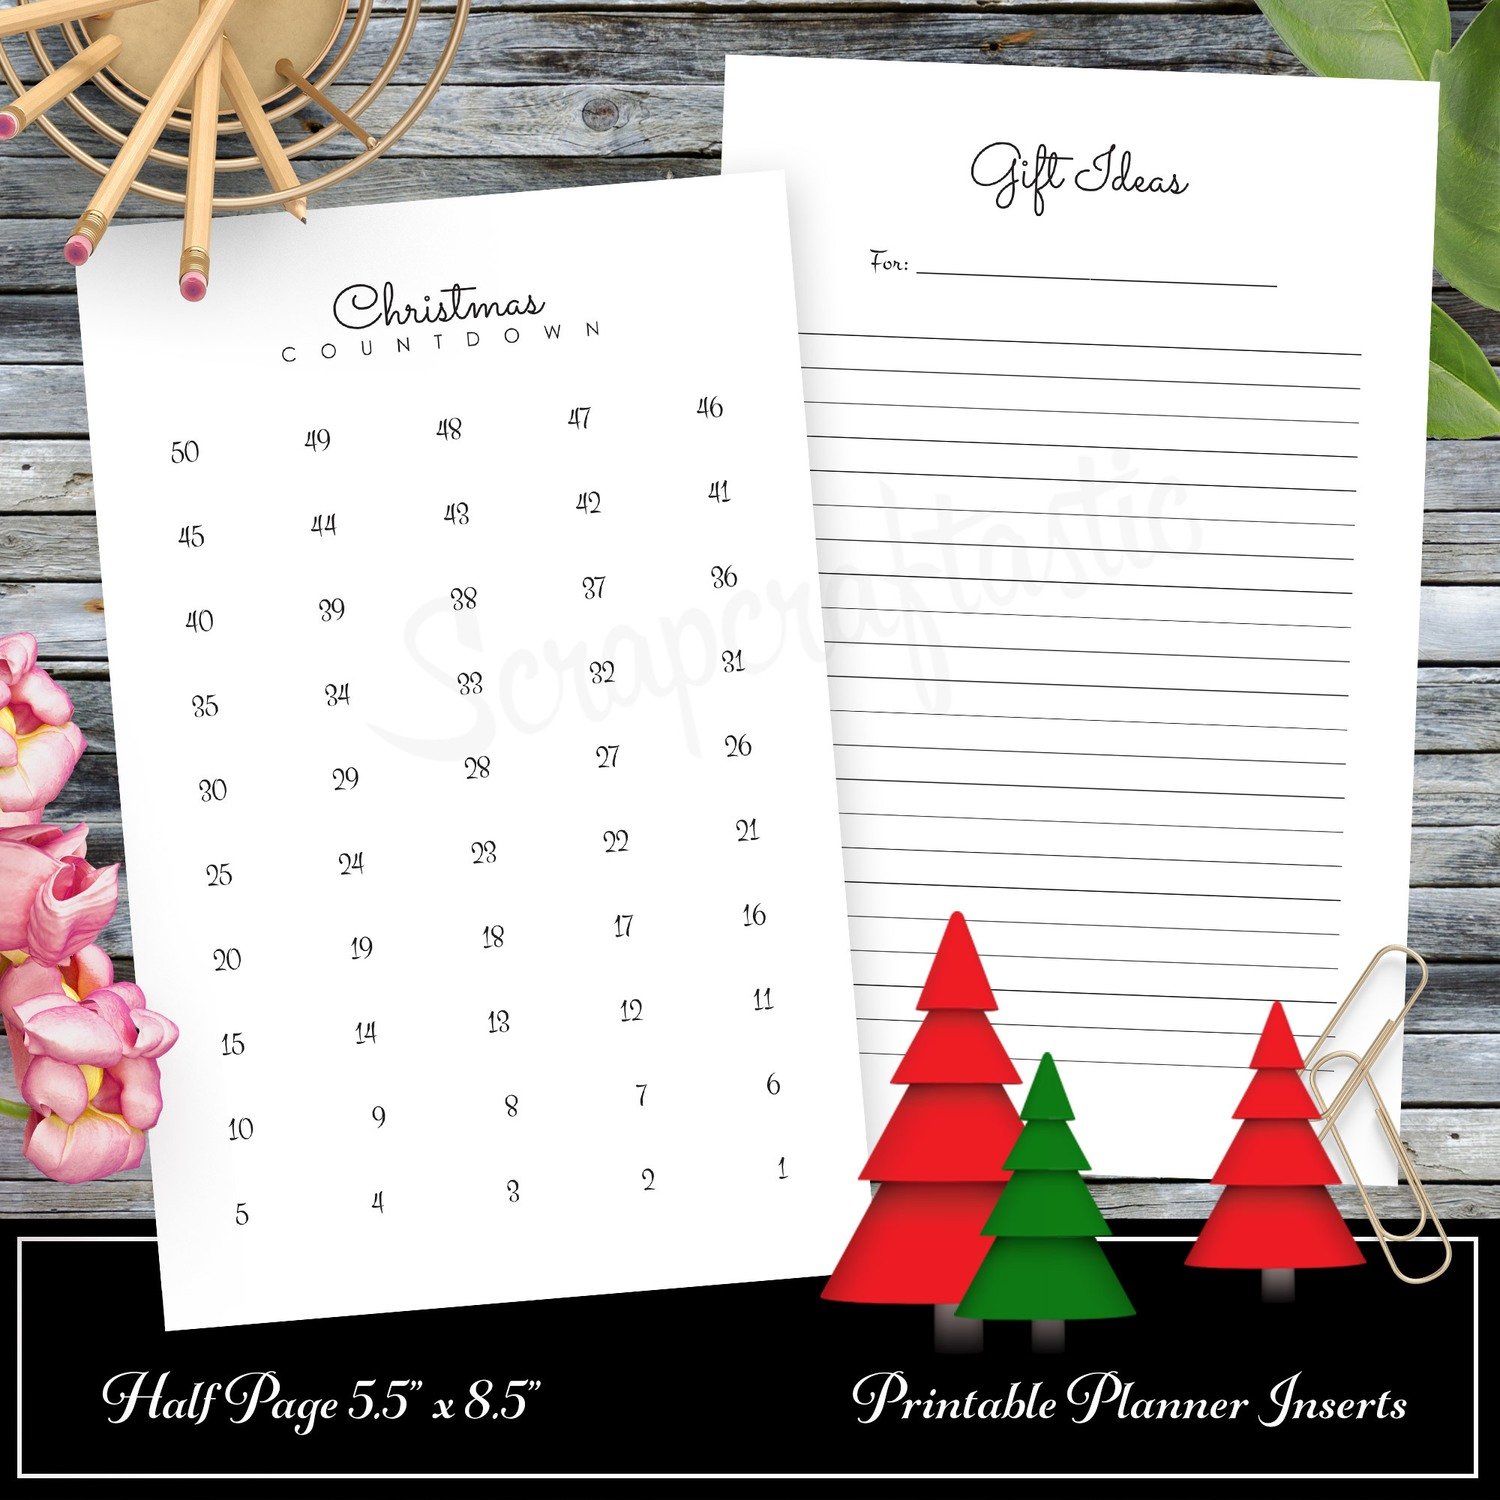 Christmas Countdown and Gift Ideas A5 Traveler's Notebook Inserts